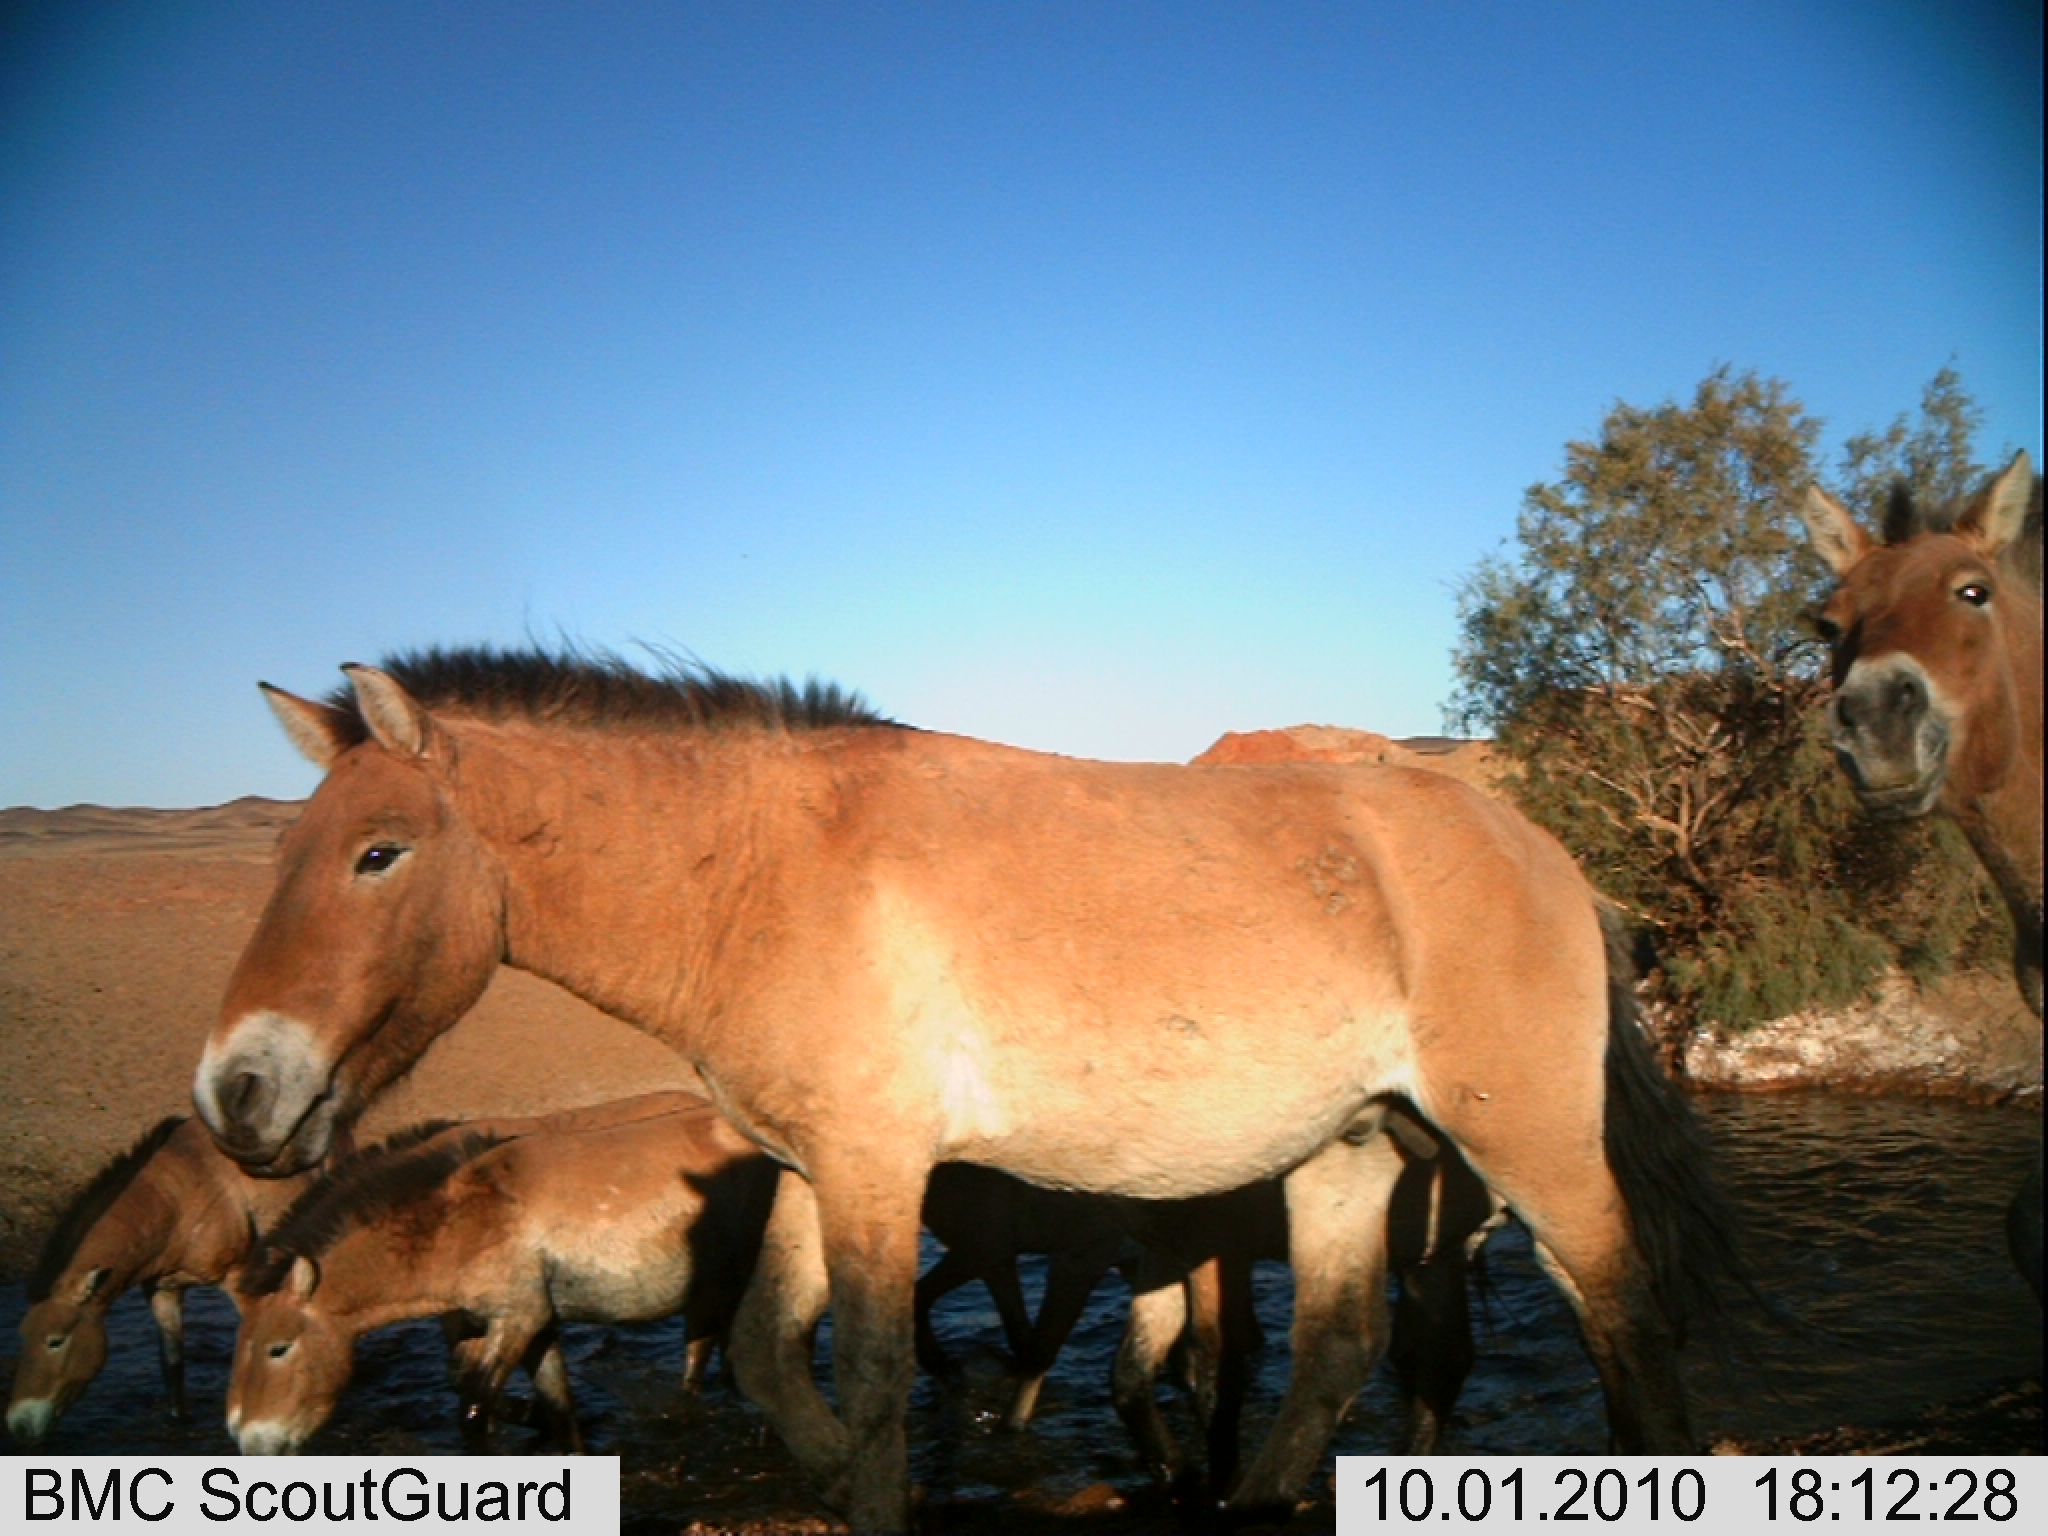 A Przewalski Horse and its group walking by the camera.